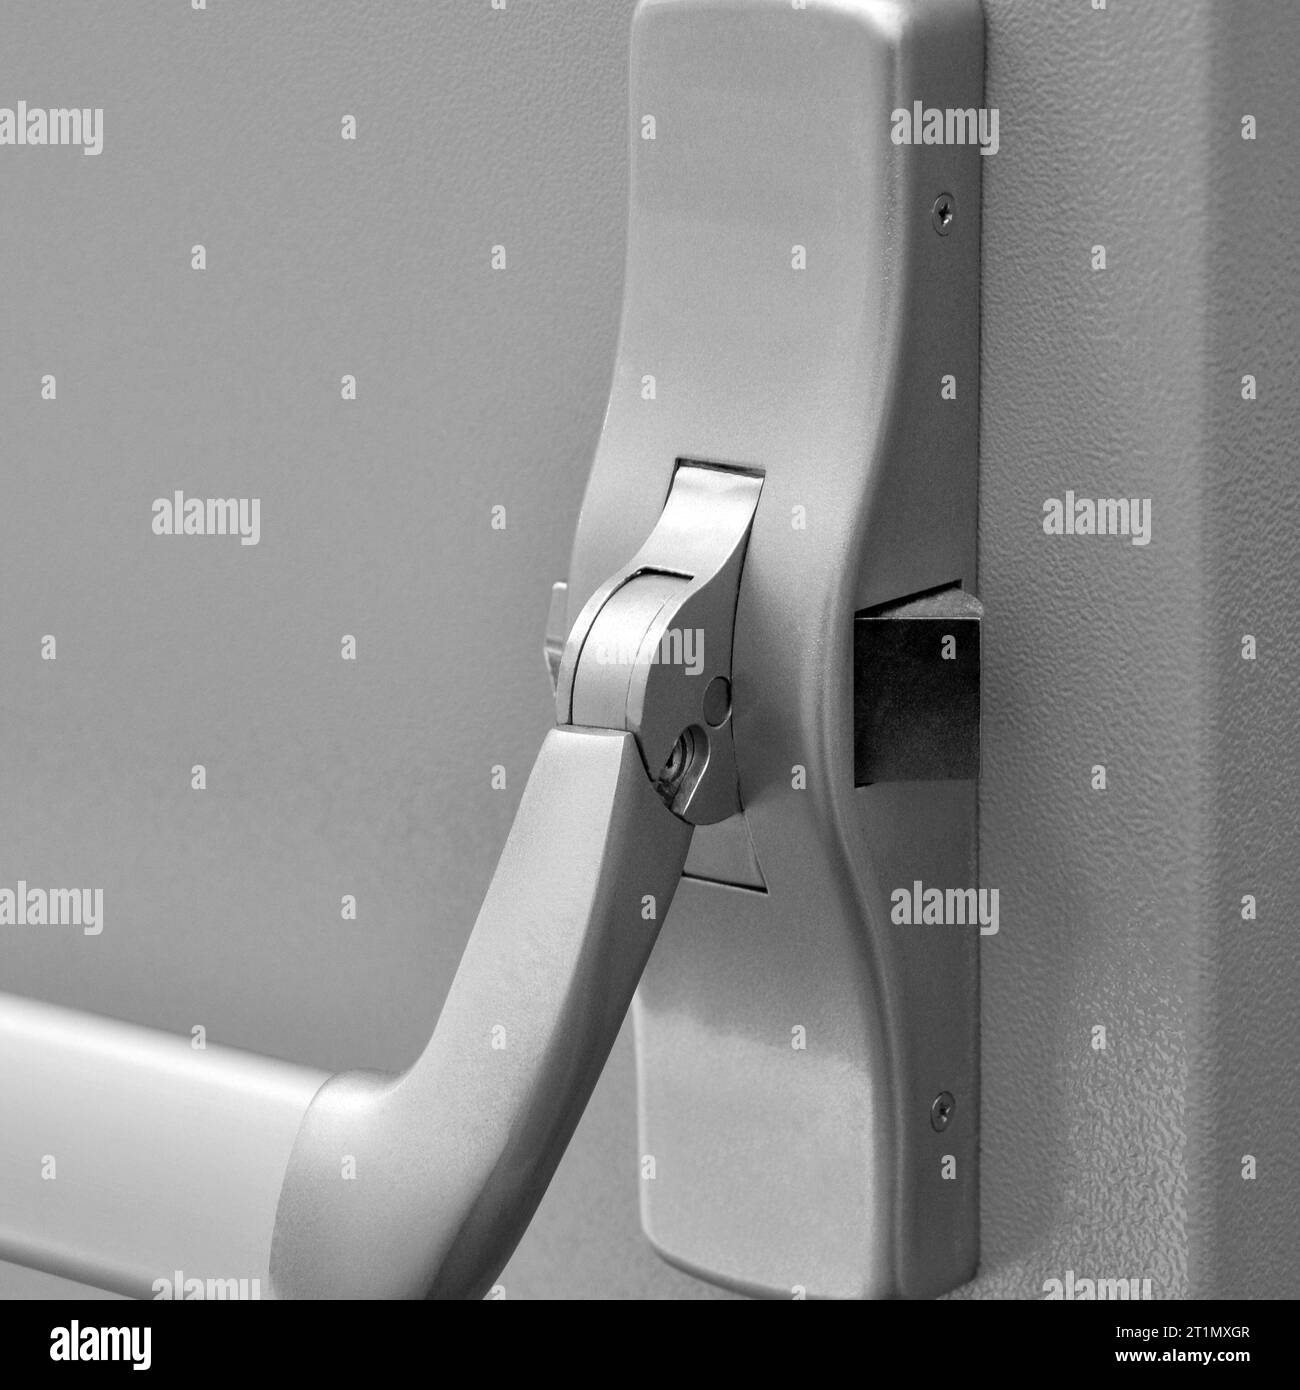 Emergency exit door. Closed up latch door handle of emergency exit. Push bar and rail for panic exit Stock Photo